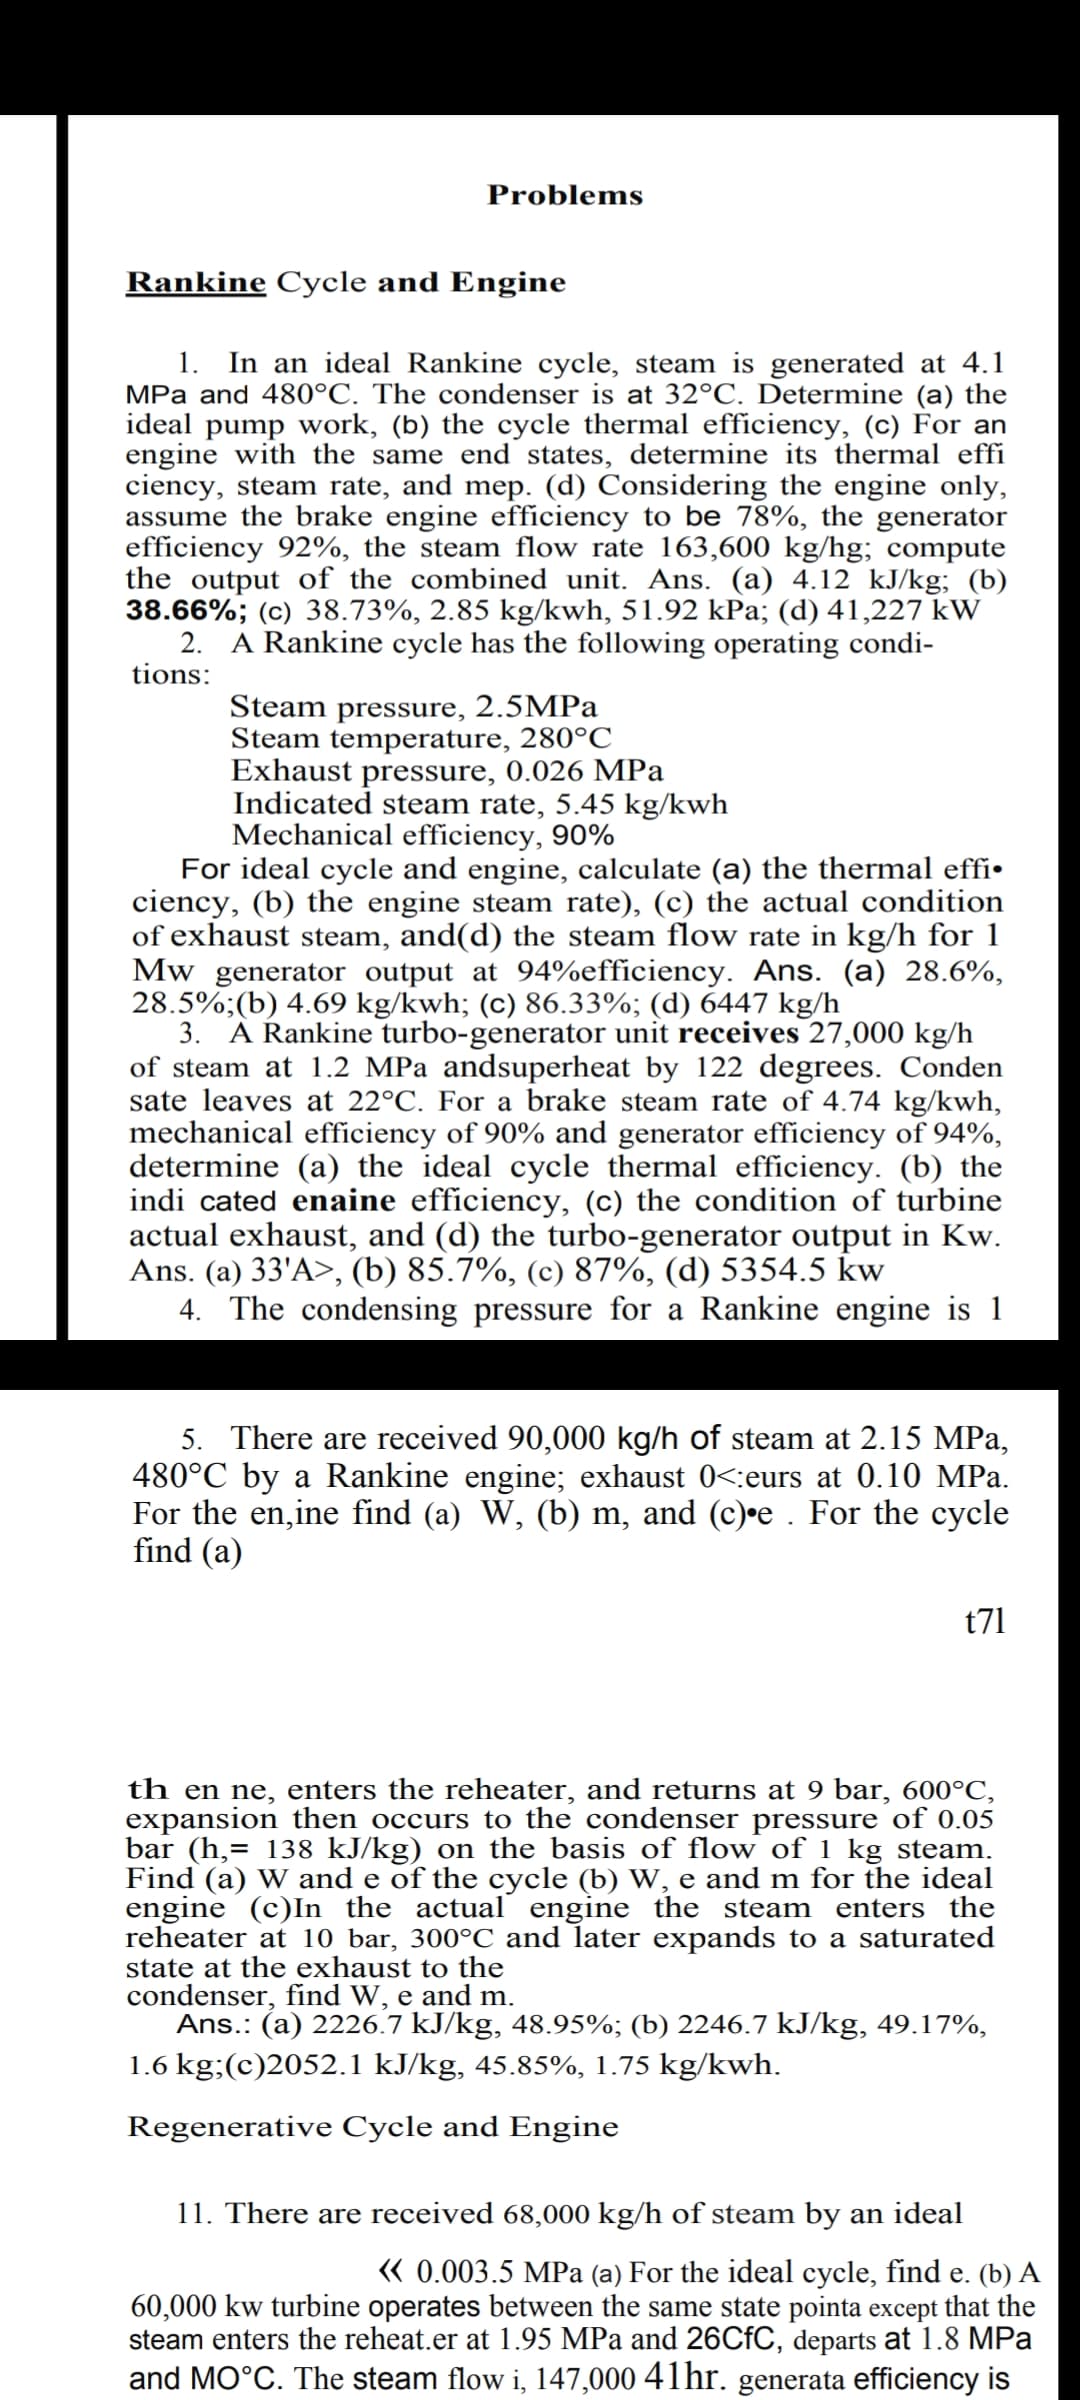 Problems
Rankine Cycle and Engine
1. In an ideal Rankine cycle, steam is generated at 4.1
MPa and 480°C. The condenser is at 32°C. Determine (a) the
ideal pump work, (b) the cycle thermal efficiency, (c) For an
engine with the same end states, determine its thermal effi
ciency, steam rate, and mep. (d) Considering the engine only,
assume the brake engine efficiency to be 78%, the generator
efficiency 92%, the steam flow rate 163,600 kg/hg; compute
the output of the combined unit. Ans. (a) 4.12 kJ/kg; (b)
38.66%; (c) 38.73%, 2.85 kg/kwh, 51.92 kPa; (d) 41,227 kW
2. A Rankine cycle has the following operating condi-
tions:
Steam pressure, 2.5MPa
Steam temperature, 280°C
Exhaust pressure, 0.026 MPa
Indicated steam rate, 5.45 kg/kwh
Mechanical efficiency, 90%
For ideal cycle and engine, calculate (a) the thermal effi•
ciency, (b) the engine steam rate), (c) the actual condition
of exhaust steam, and(d) the steam flow rate in kg/h for 1
Mw generator output at 94%efficiency. Ans. (a) 28.6%,
28.5%;(b) 4.69 kg/kwh; (c) 86.33%; (d) 6447 kg/h
3. A Rankine turbo-generator unit receives 27,000 kg/h
of steam at 1.2 MPa andsuperheat by 122 degrees. Conden
sate leaves at 22°C. For a brake steam rate of 4.74 kg/kwh,
mechanical efficiency of 90% and generator efficiency of 94%,
determine (a) the ideal cycle thermal efficiency. (b) the
indi cated enaine efficiency, (c) the condition of turbine
actual exhaust, and (d) the turbo-generator output in Kw.
Ans. (a) 33'A>, (b) 85.7%, (c) 87%, (d) 5354.5 kw
4. The condensing pressure for a Rankine engine is 1
5. There are received 90,000 kg/h of steam at 2.15 MPa,
480°C by a Rankine engine; exhaust 0<:eurs at 0.10 MPa.
For the en,ine find (a) W, (b) m, and (c)•e . For the cycle
find (a)
t71
th en ne, enters the reheater, and returns at 9 bar, 600°C,
expansion then occurs to the condenser pressure of 0.05
bar (h,= 138 kJ/kg) on the basis of flow of 1 kg steam.
Find (a) W and e of the cycle (b) W, e and m for the ideal
engine (c)In the actual engine the steam enters the
reheater at 10 bar, 300°C and later expands to a saturated
state at the exhaust to the
condenser, find W, e and m.
Ans.: (a) 2226.7 kJ/kg, 48.95%; (b) 2246.7 kJ/kg, 49.17%,
1.6 kg;(c)2052.1 kJ/kg, 45.85%, 1.75 kg/kwh.
Regenerative Cycle and Engine
11. There are received 68,000 kg/h of steam by an ideal
« 0.003.5 MPa (a) For the ideal cycle, find e. (b) A
60,000 kw turbine operates between the same state pointa except that the
steam enters the reheat.er at 1.95 MPa and 26CFC, departs at 1.8 MPa
and MO°C. The steam flow i, 147,000 41hr. generata efficiency is
